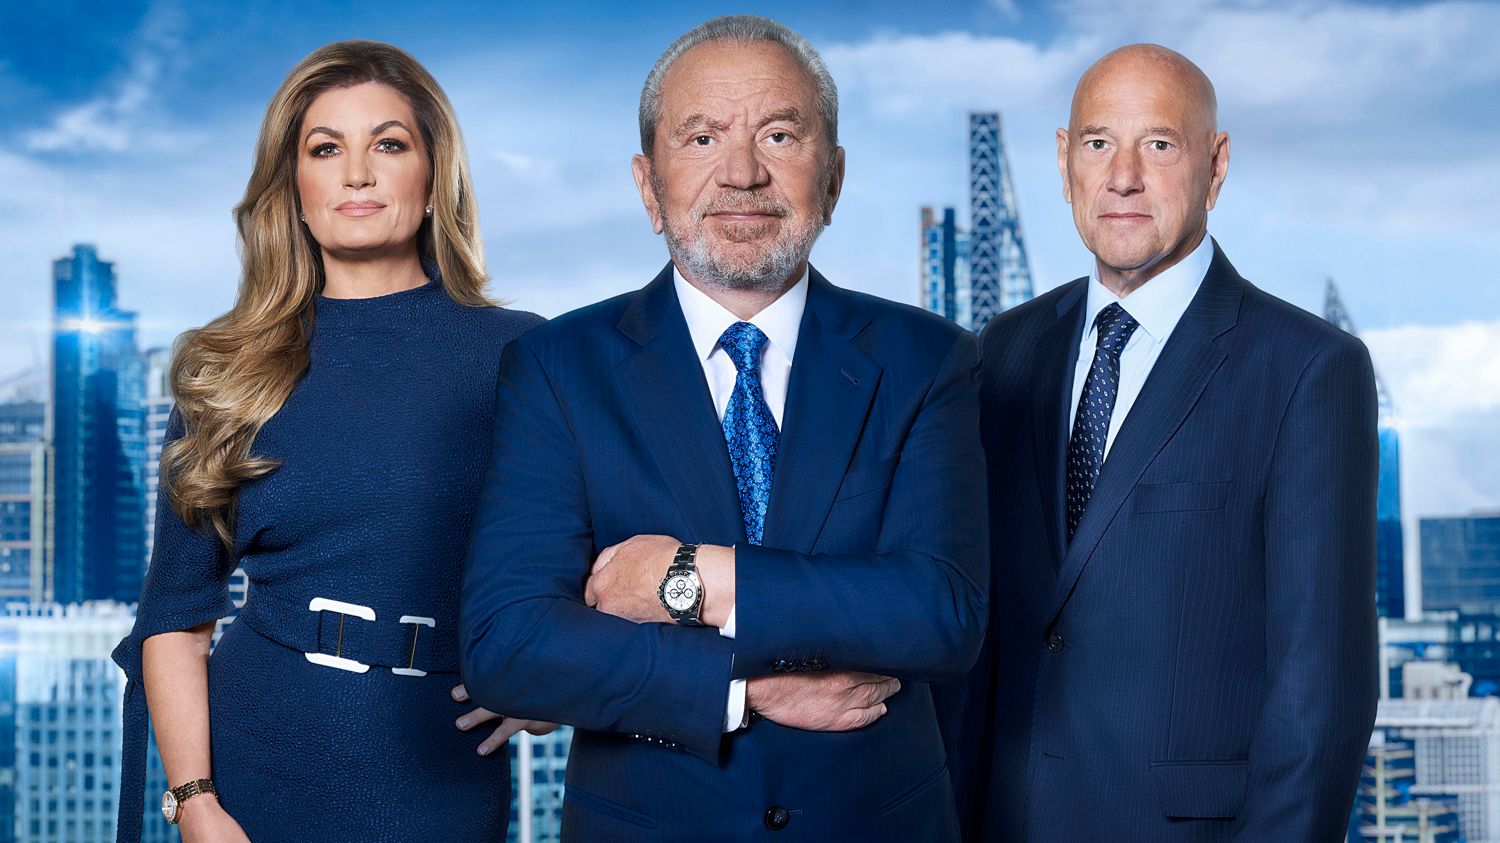 Your ultimate guide to The Apprentice series 17